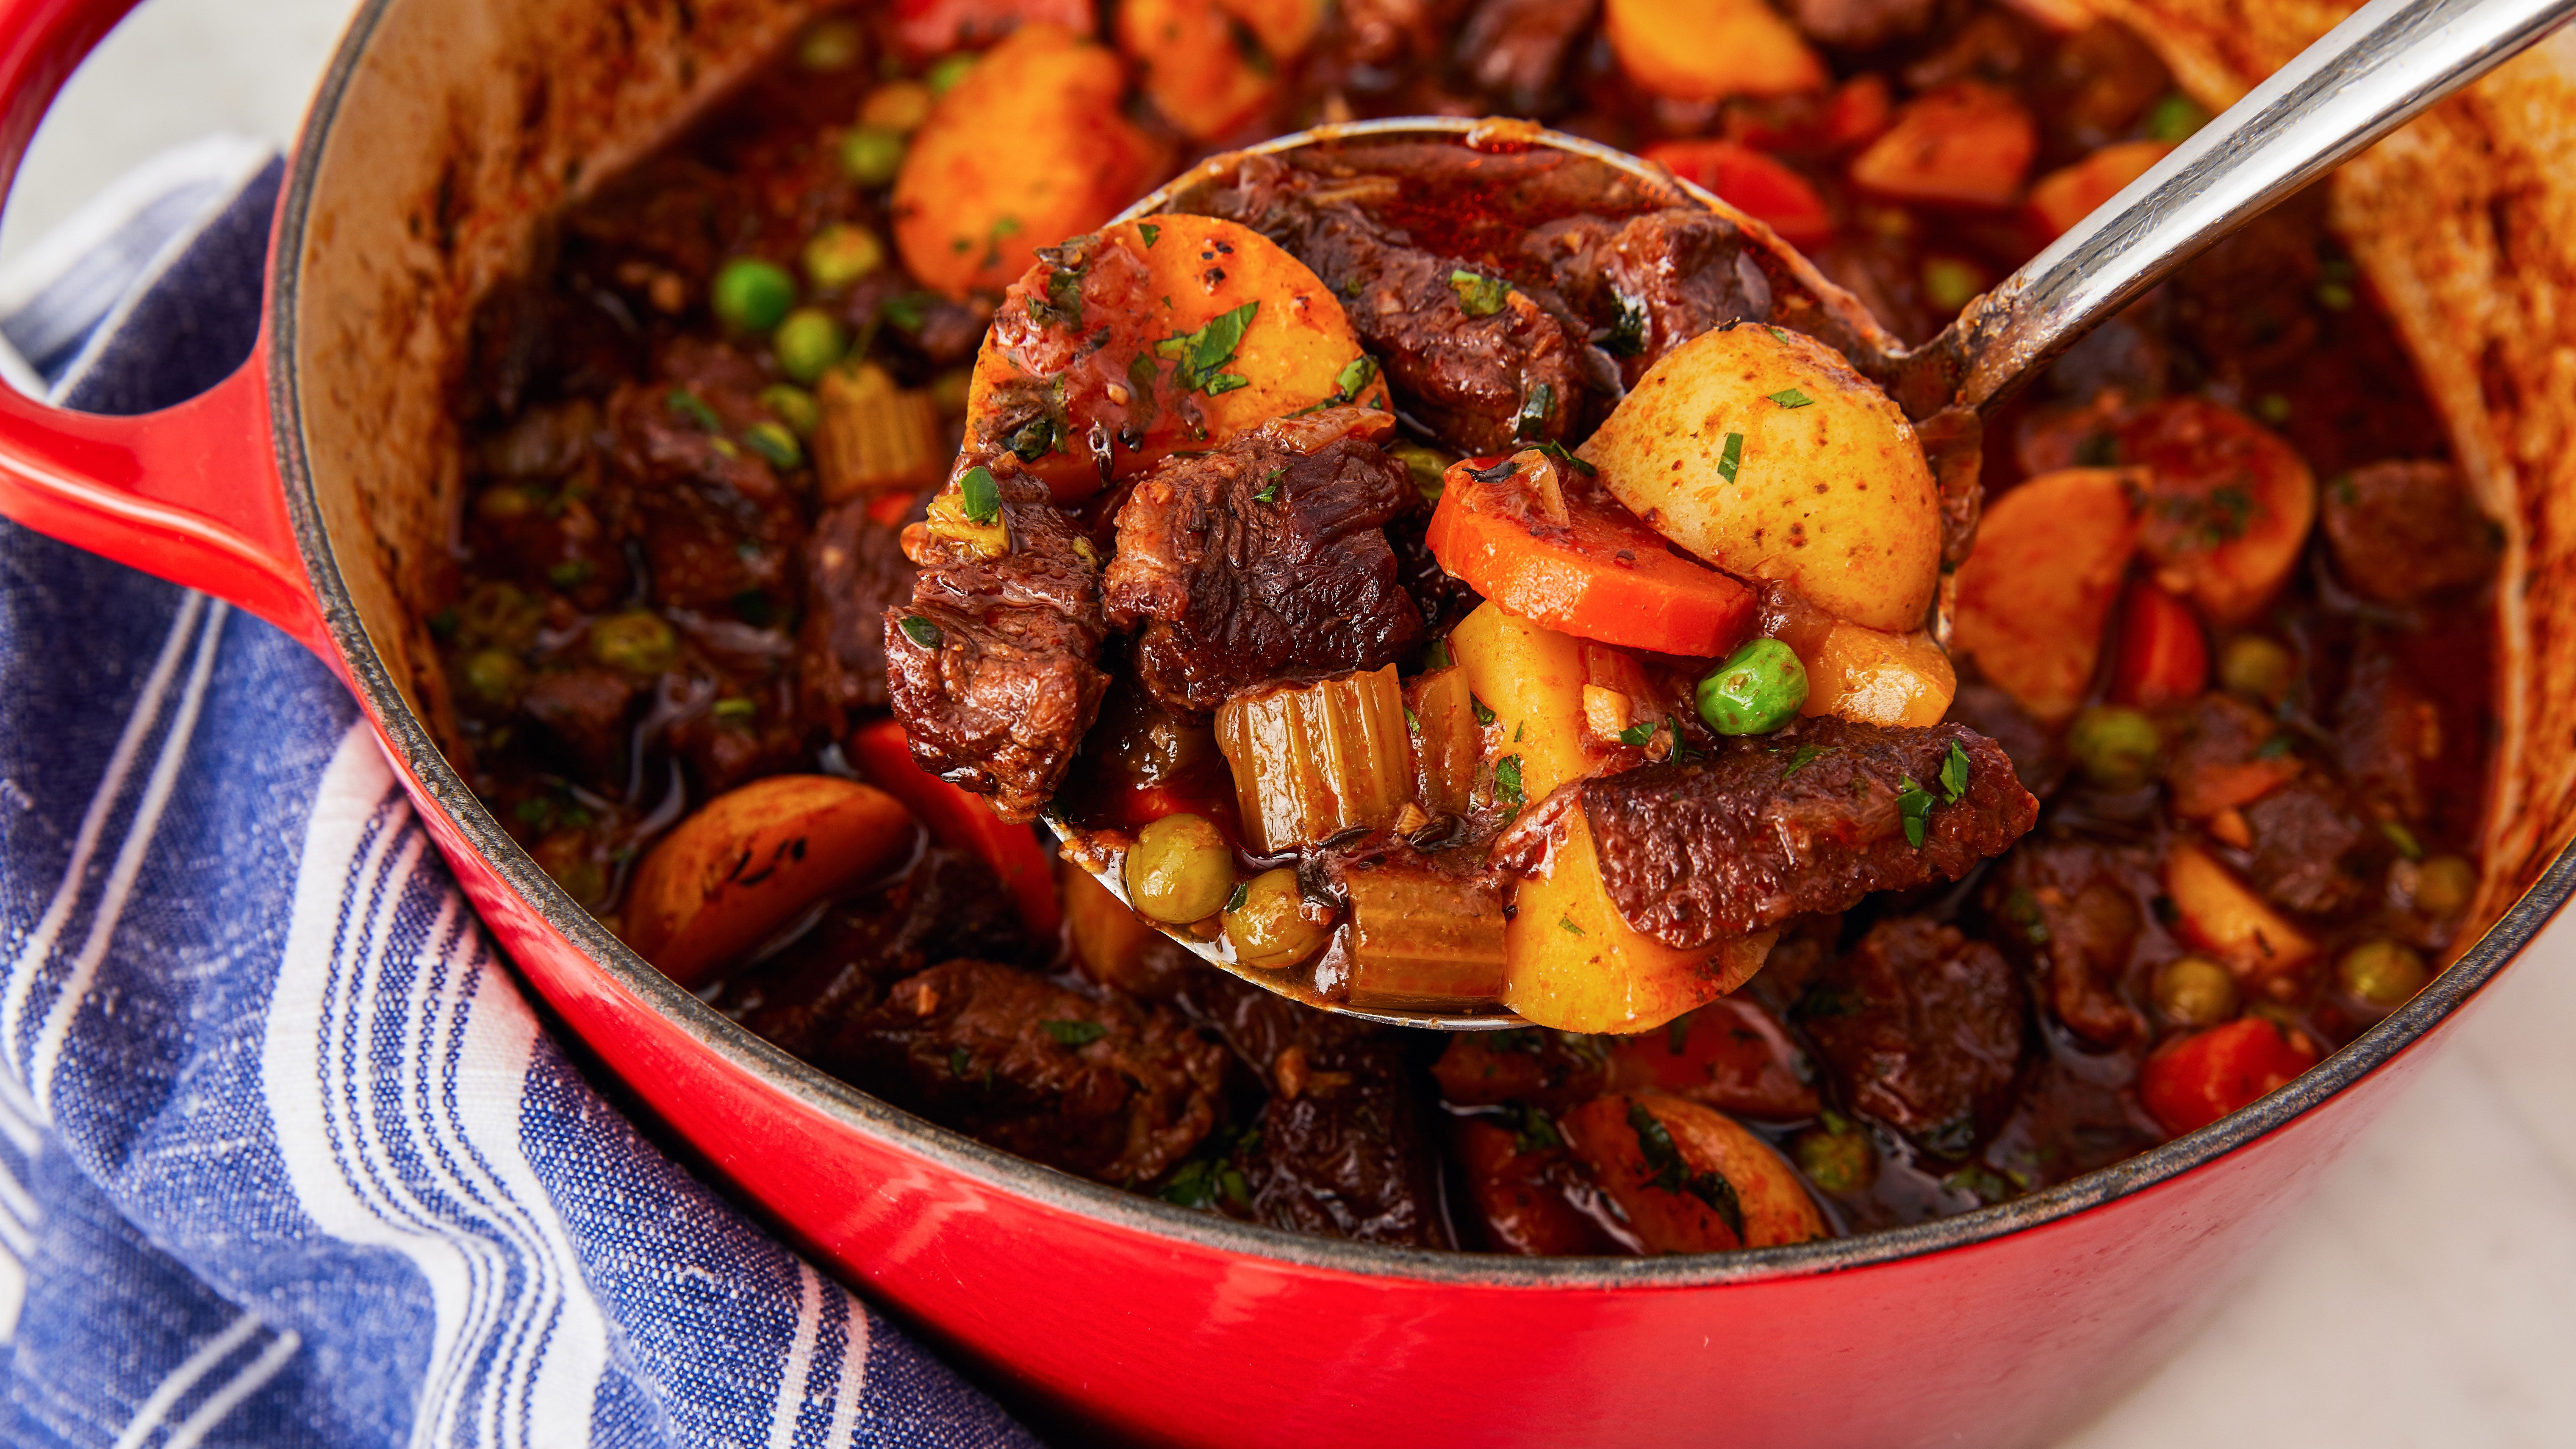 33 Dutch Oven Recipes for One-Pot Meals